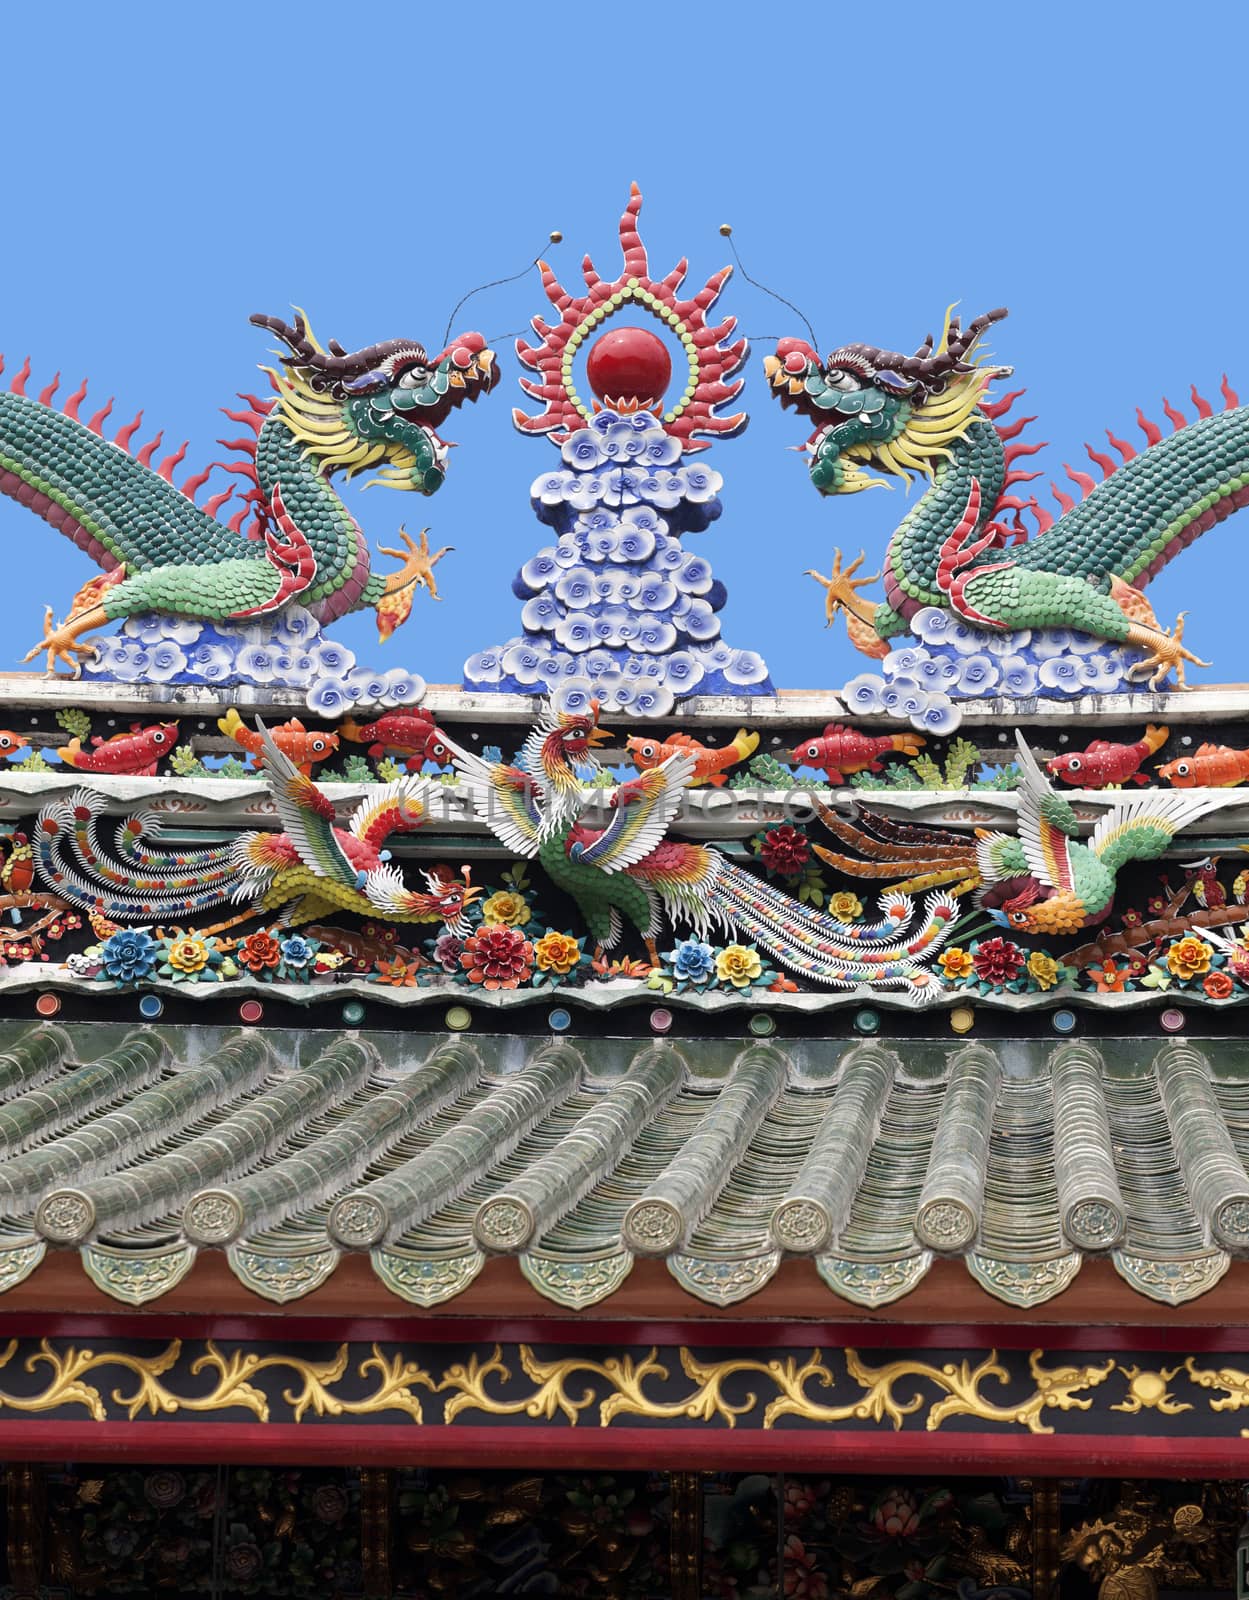 Dragon on a roof of a Vietnamese temple